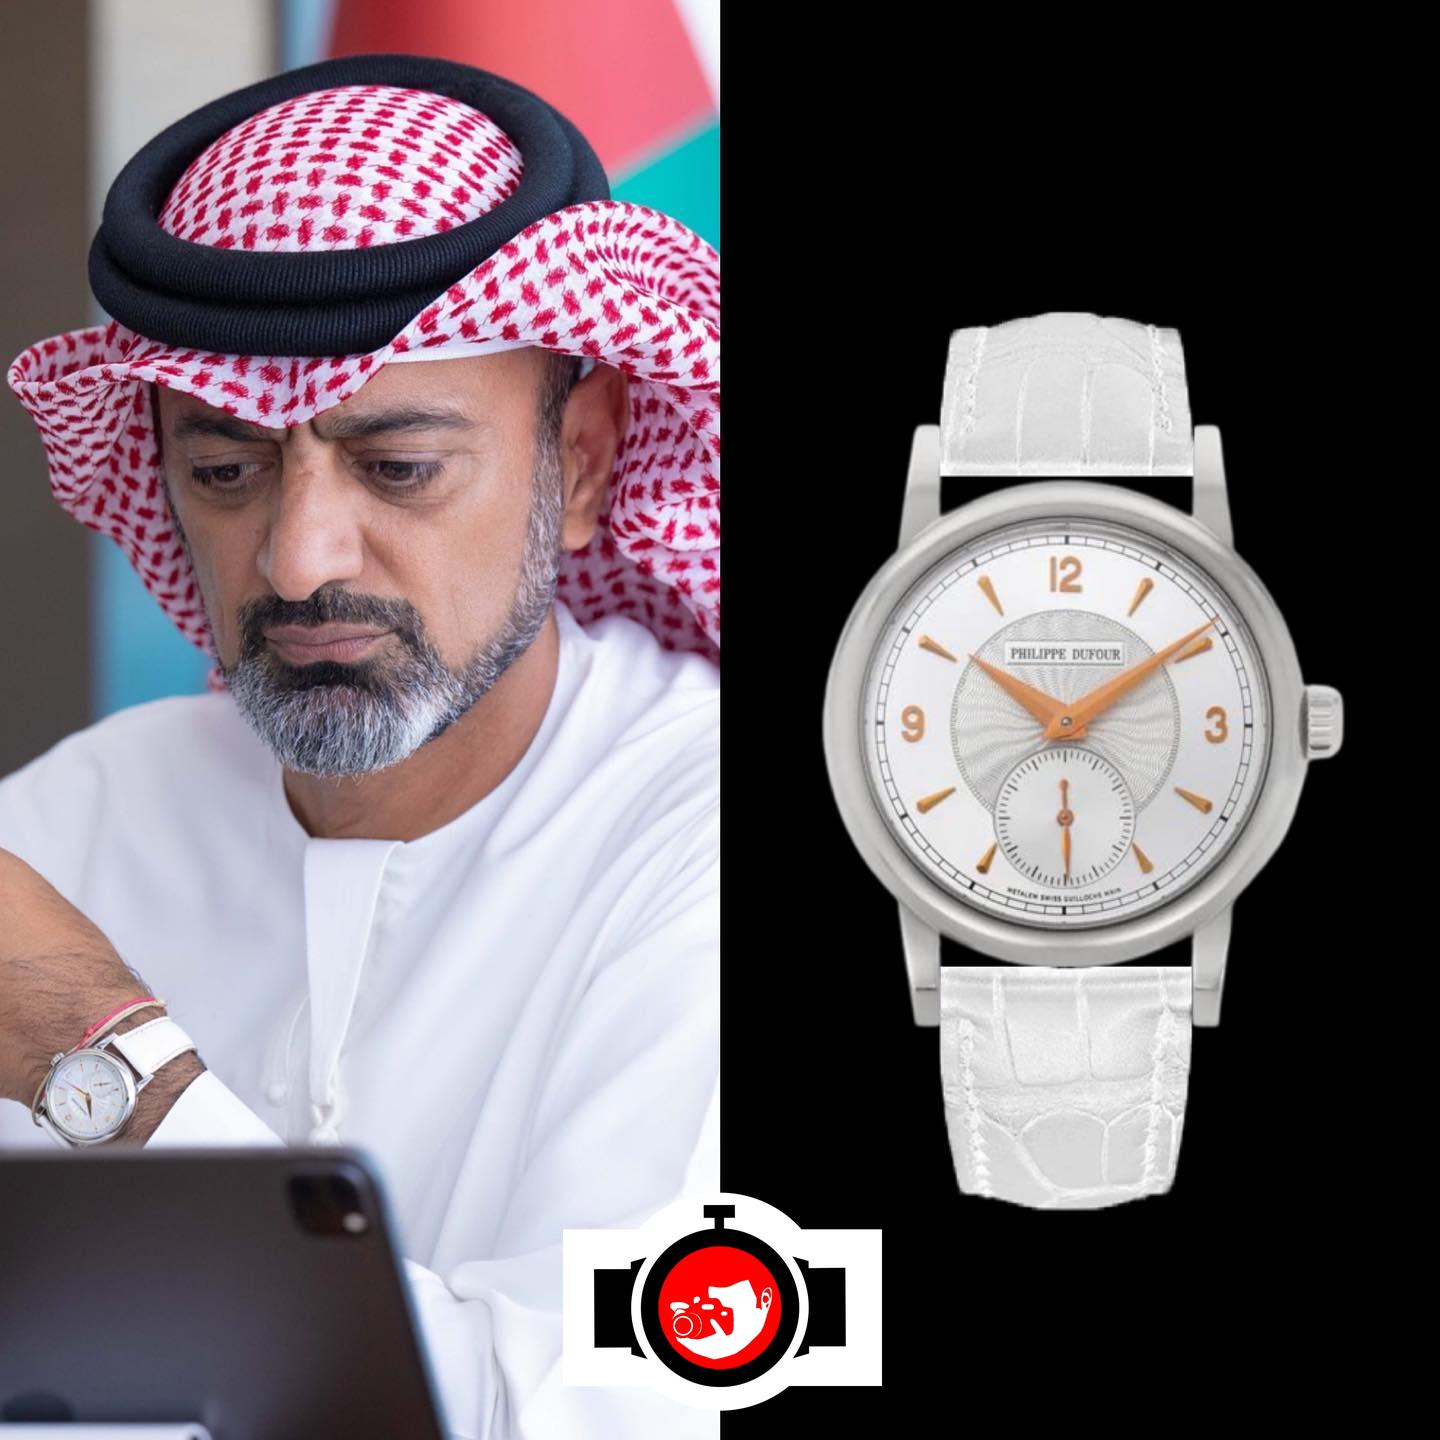 Ammar bin Humaid Al Nuaimi's Dazzling Watch Collection: A Closer Look at the Philippe Dufour 'Simplicity'